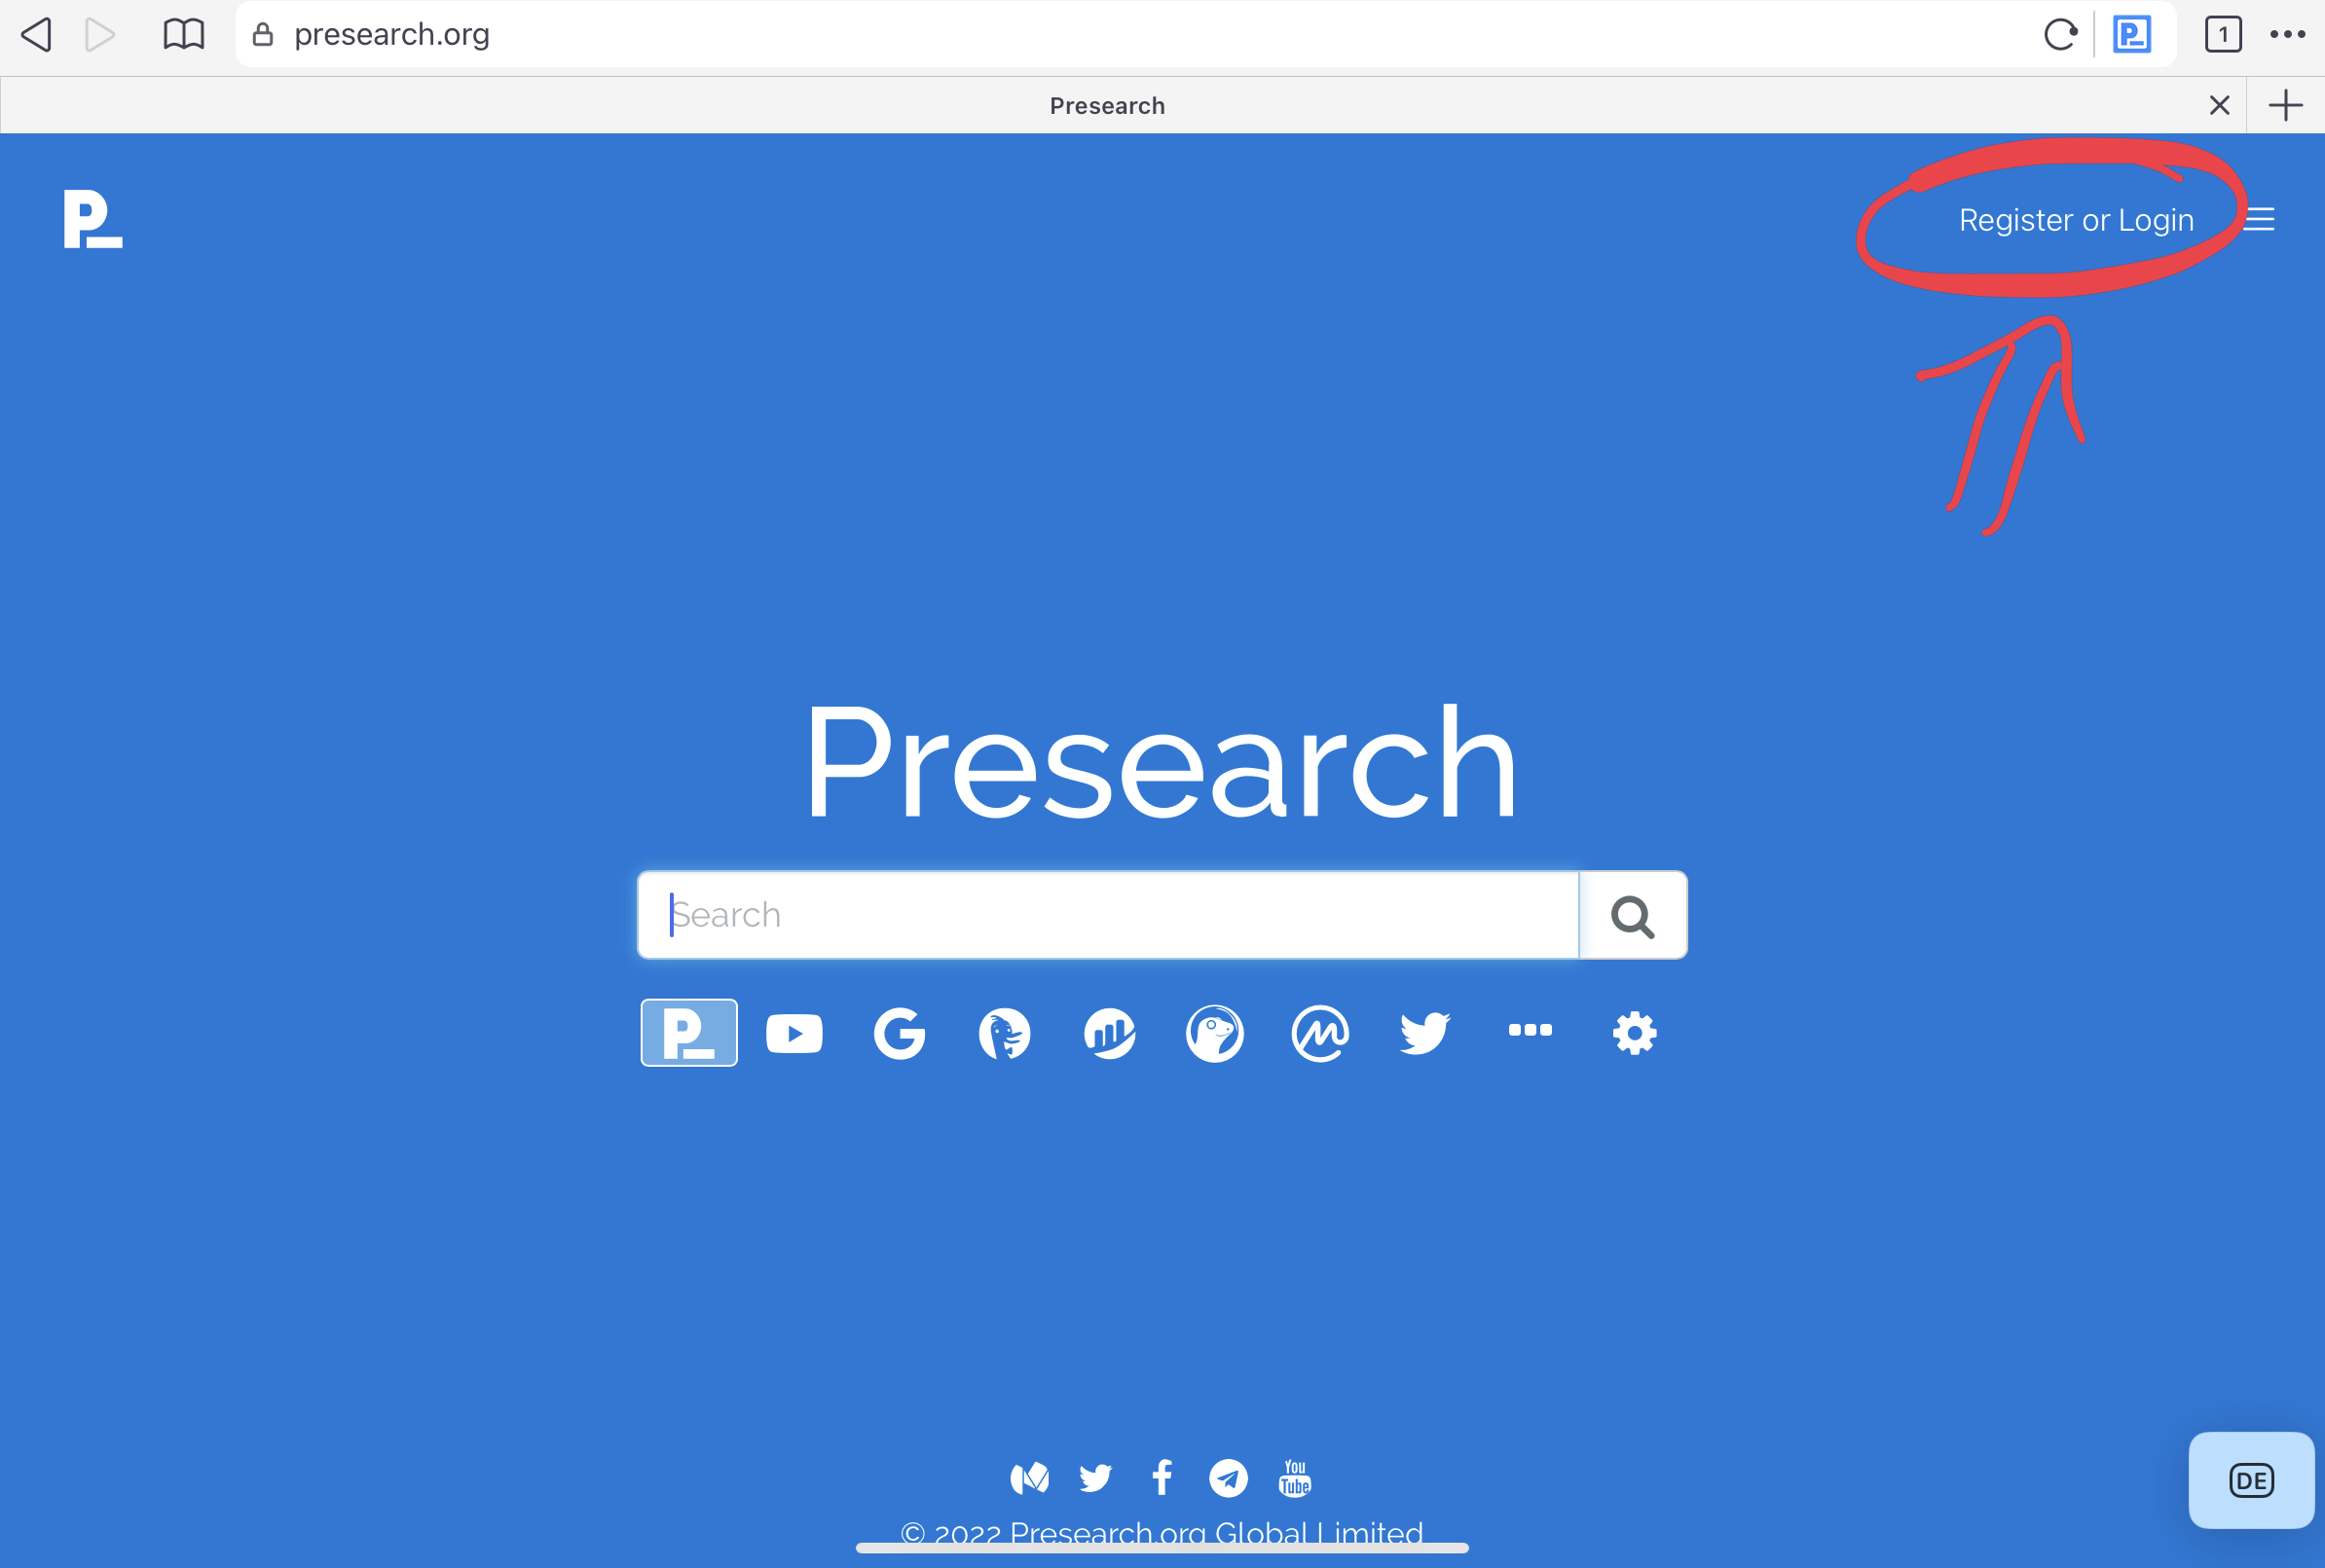 Presearch Login With Your Account